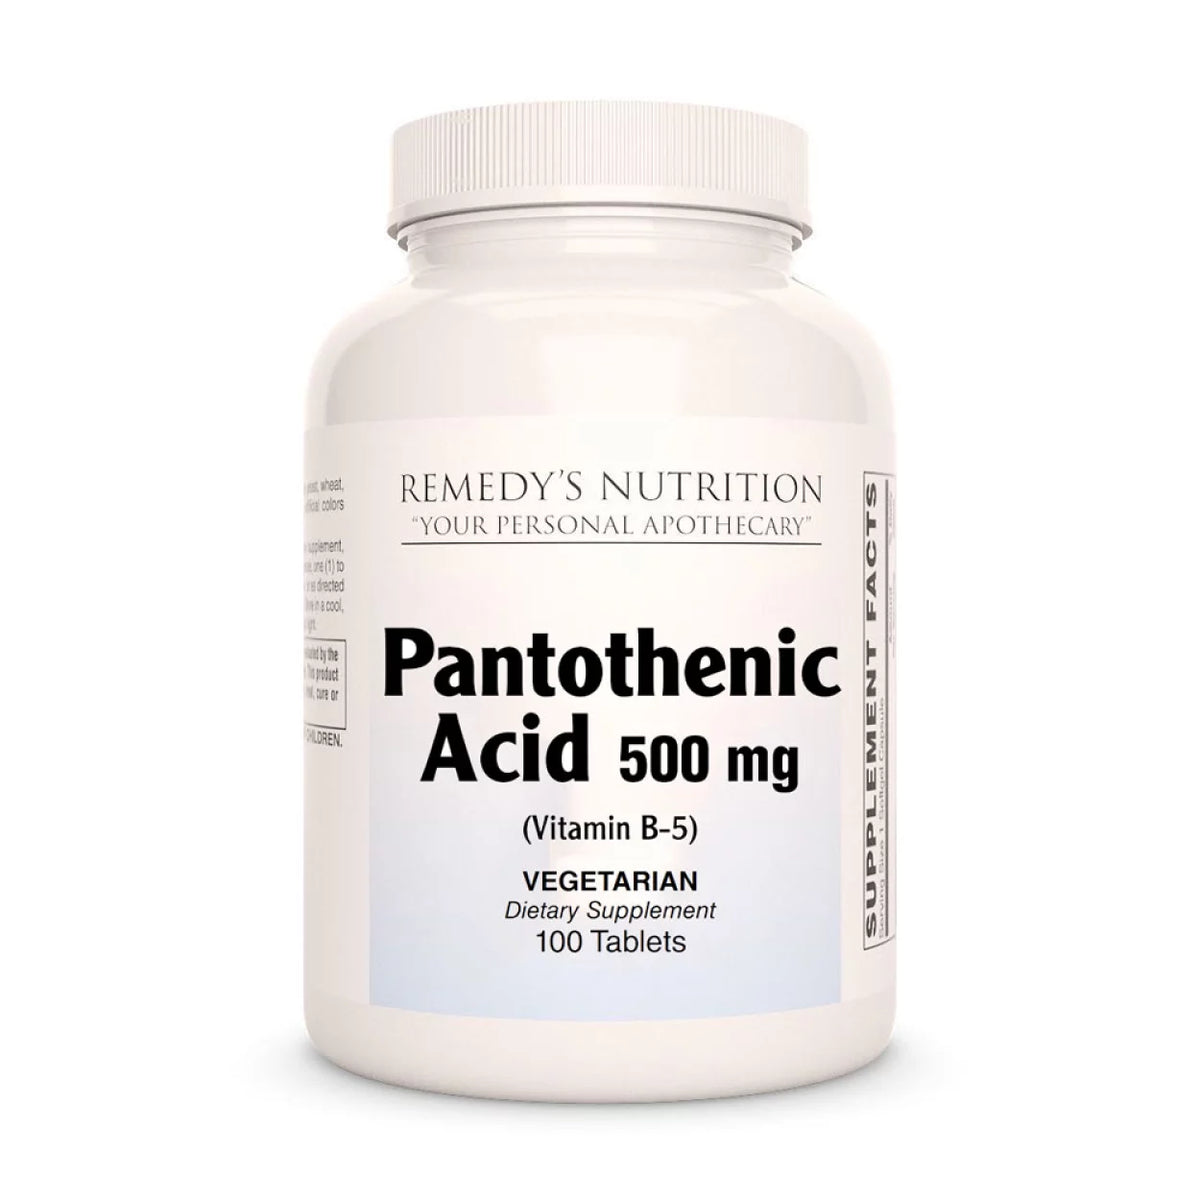 Image of Remedy's Nutrition® Pantothenic Acid Vitamin B-5 Tablets Dietary Supplement front bottle.